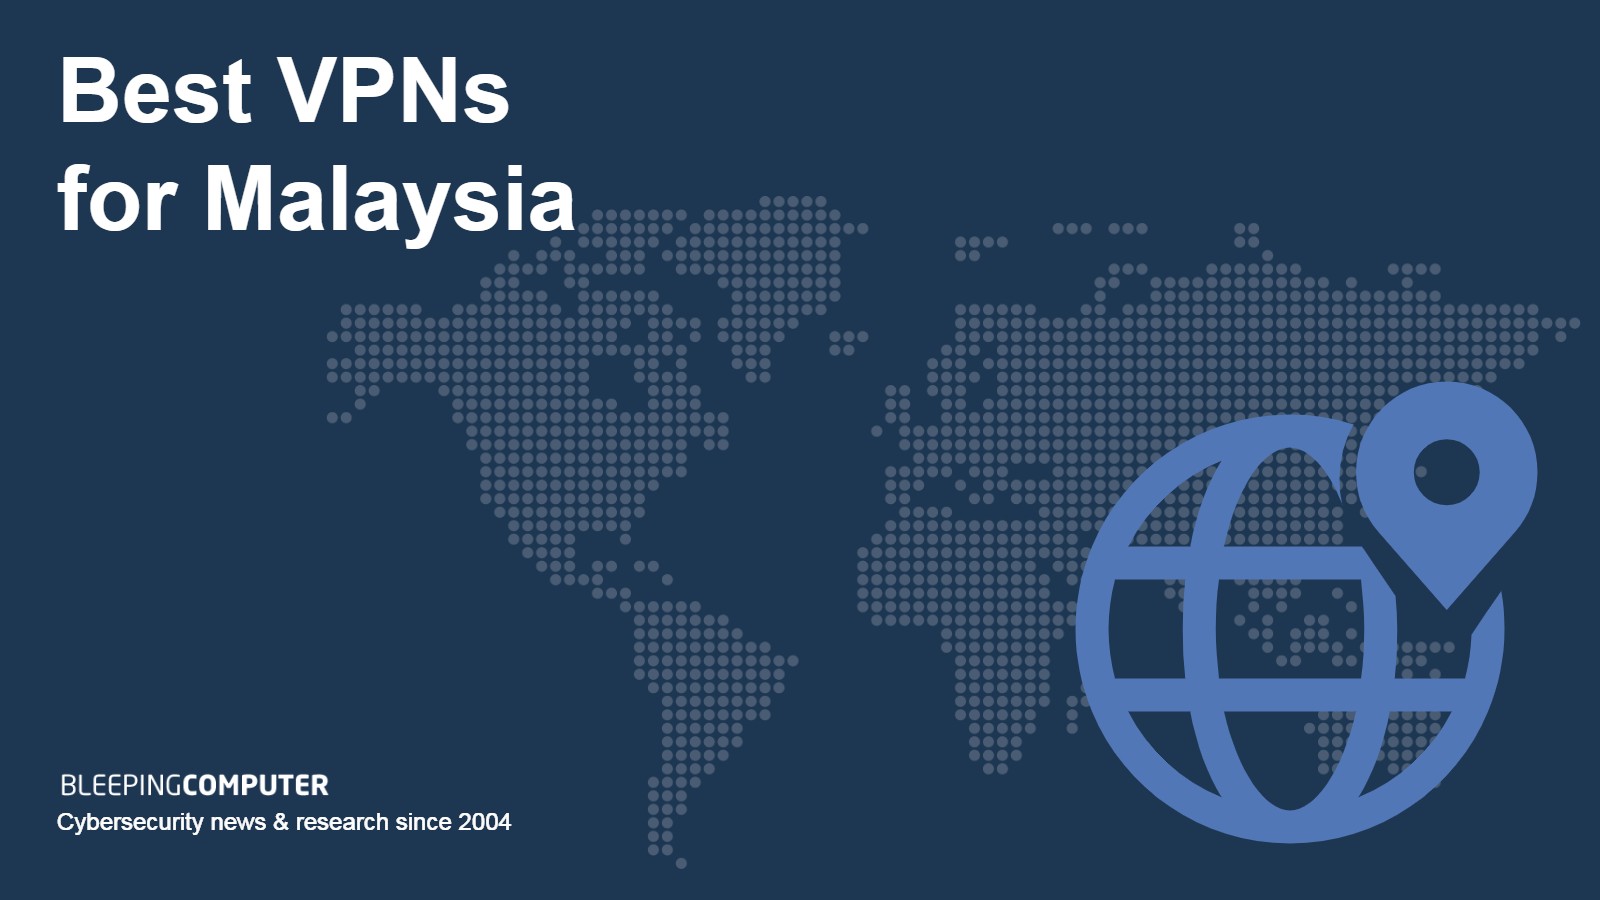 Best VPNs for Malaysia